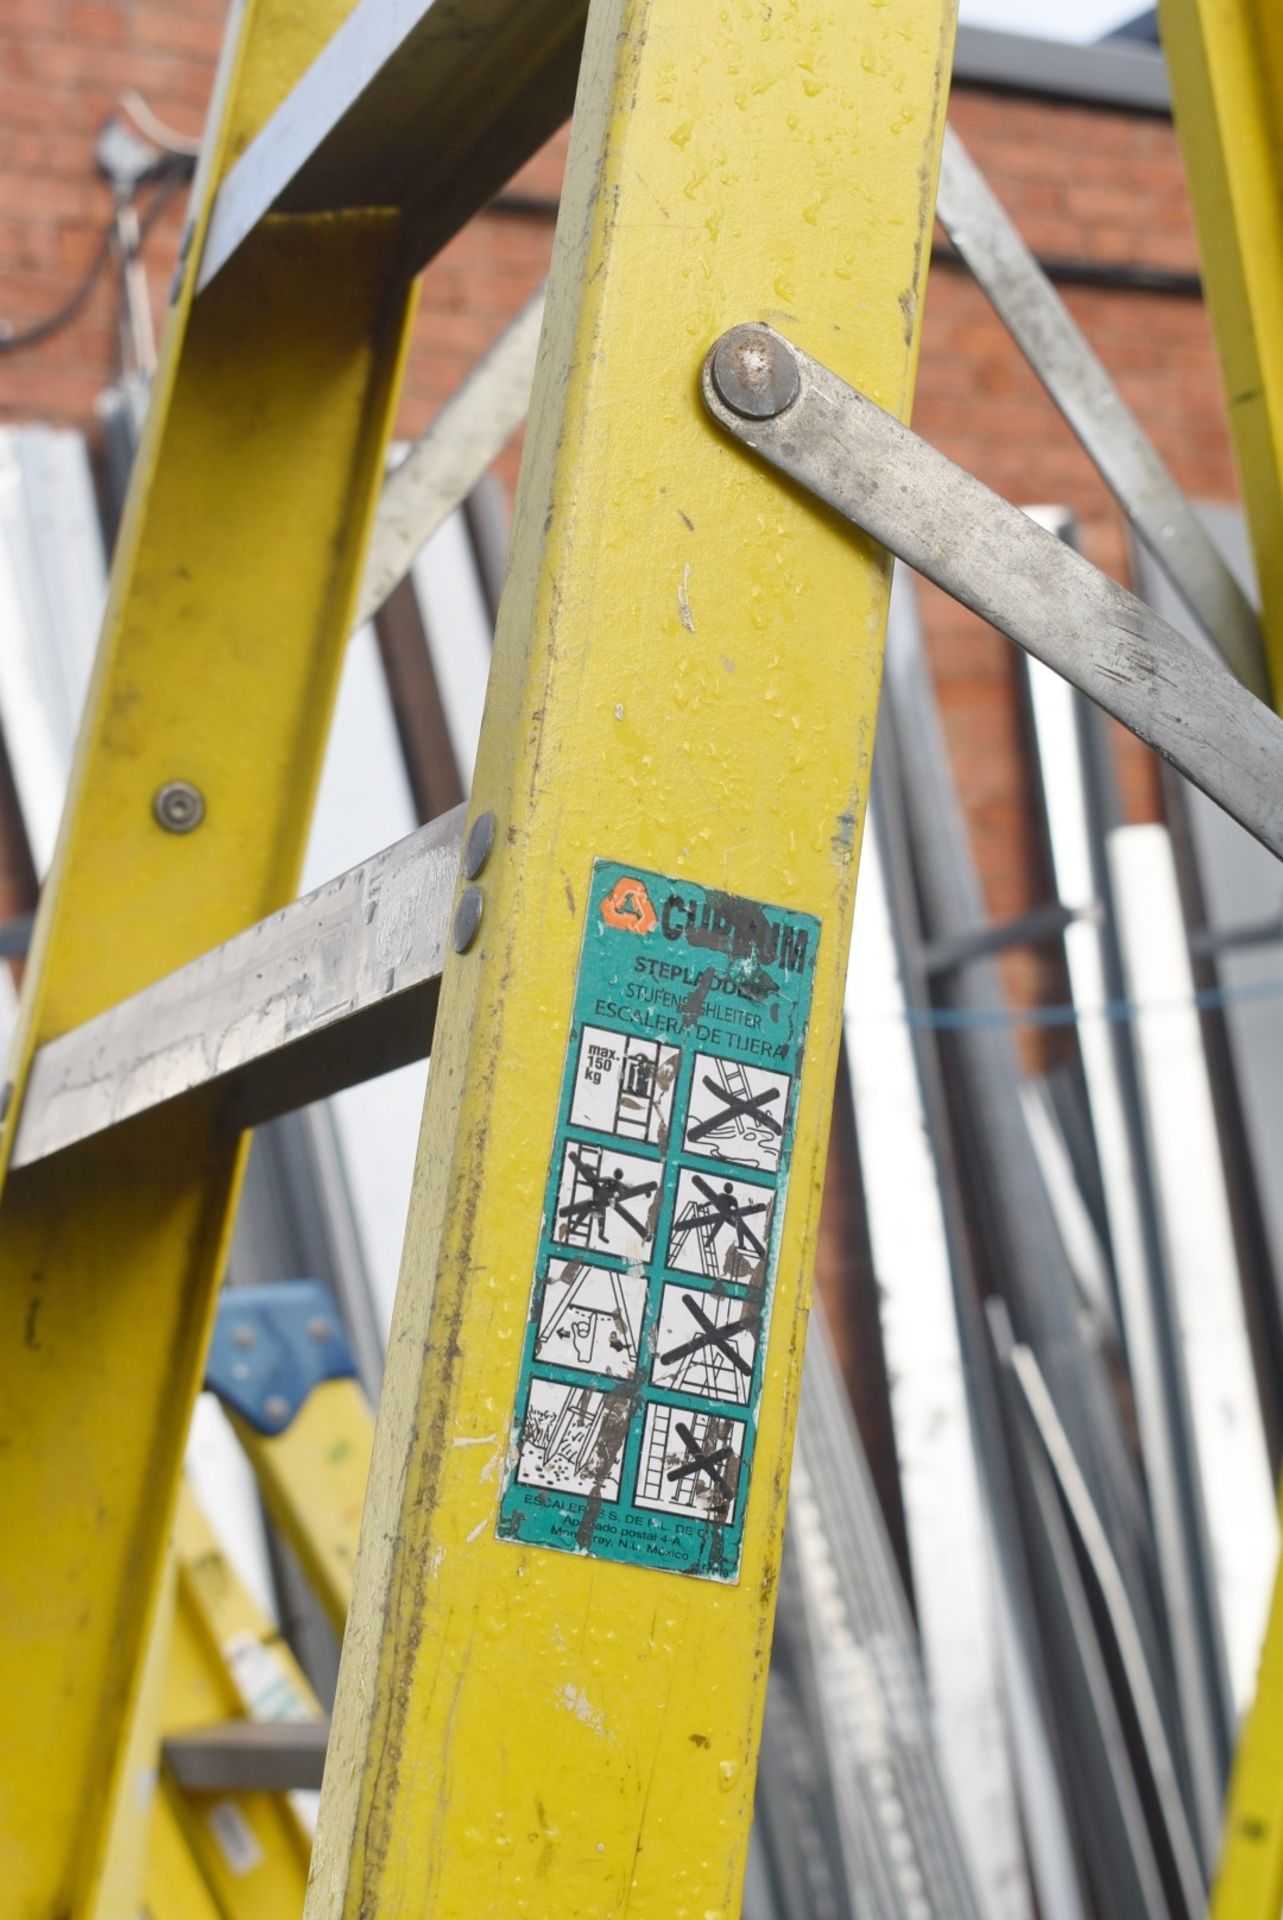 1 x Fibreglass Site Ladder With 9 Treads - Suitable For Working Around Thermal or Electrical Dangers - Image 3 of 9